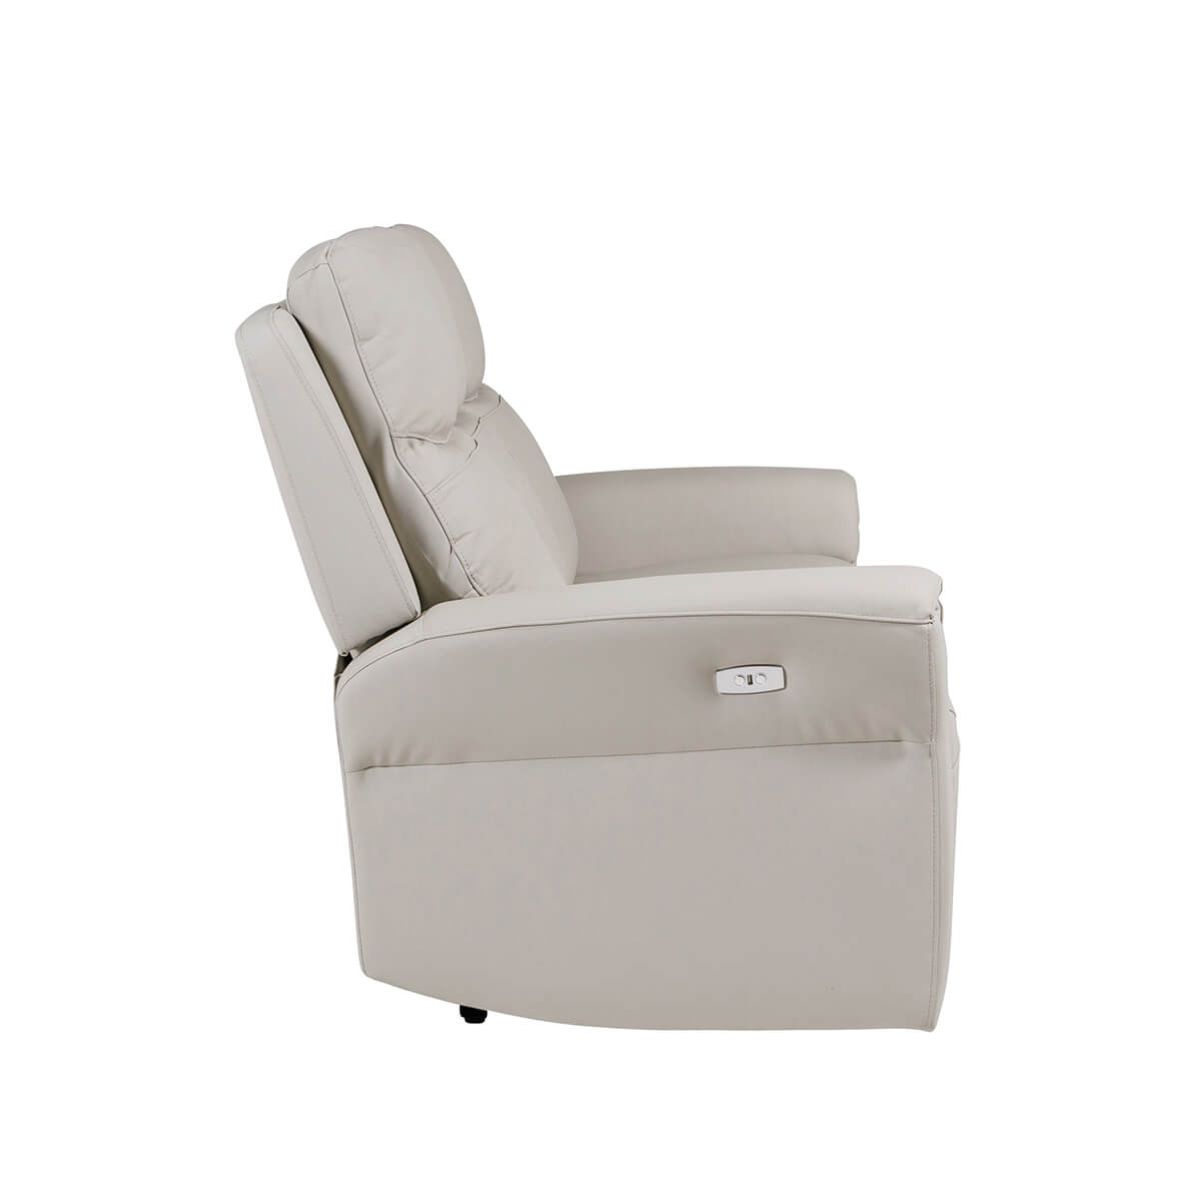 Rosslare Leather 3 Seater Electric Recliner Beige - 5